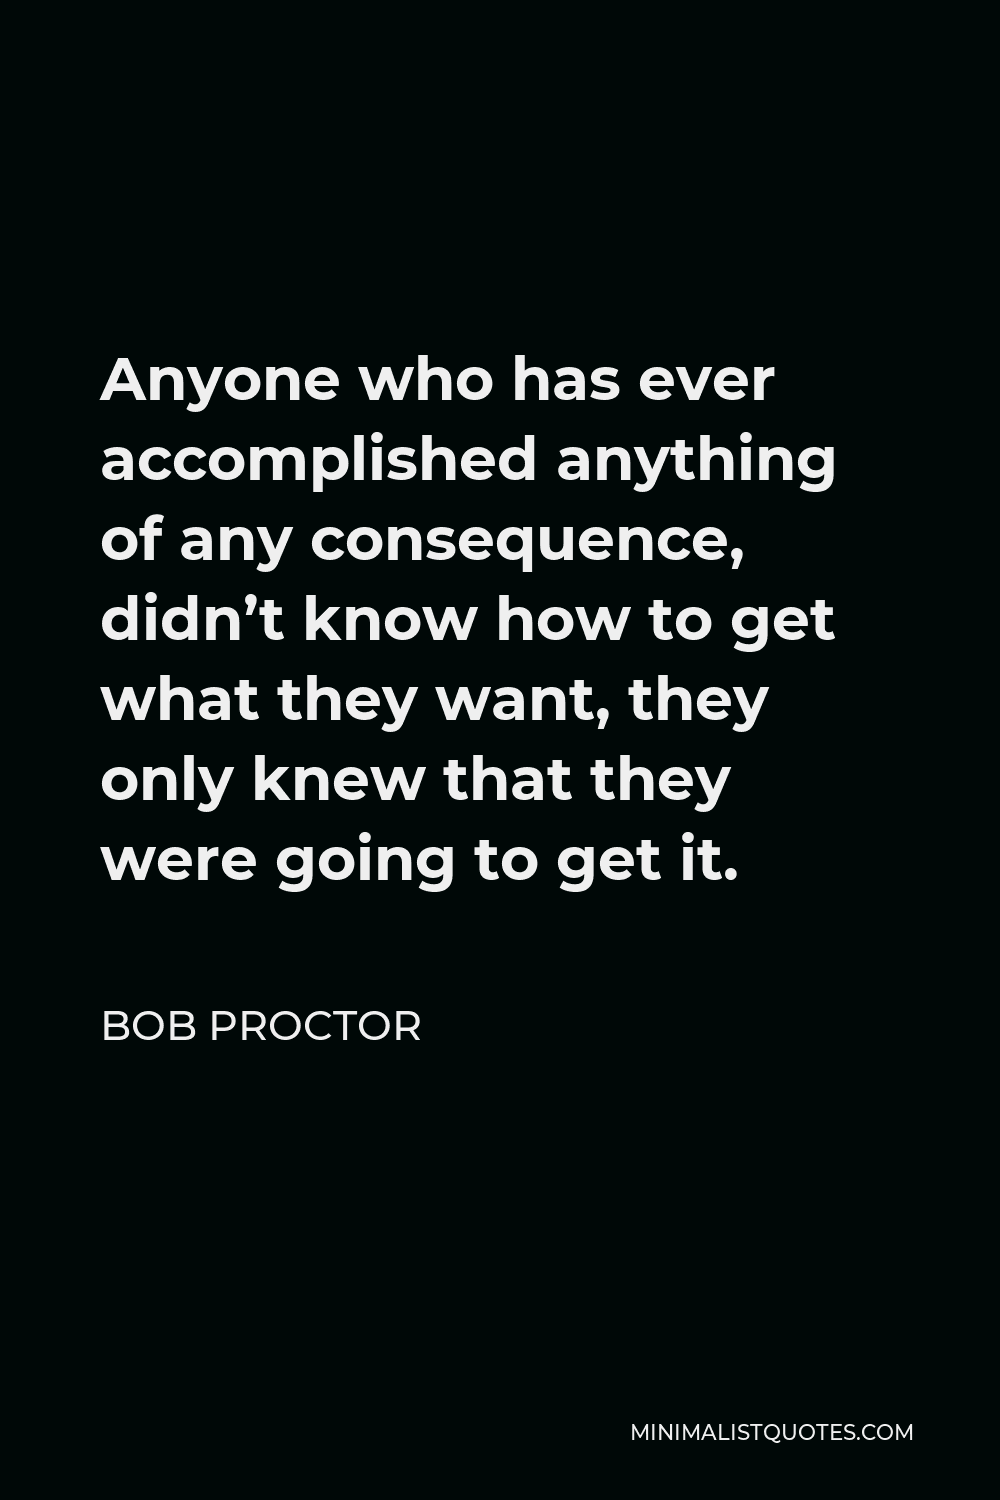 Bob Proctor Quote - Anyone who has ever accomplished anything of any consequence, didn’t know how to get what they want, they only knew that they were going to get it.